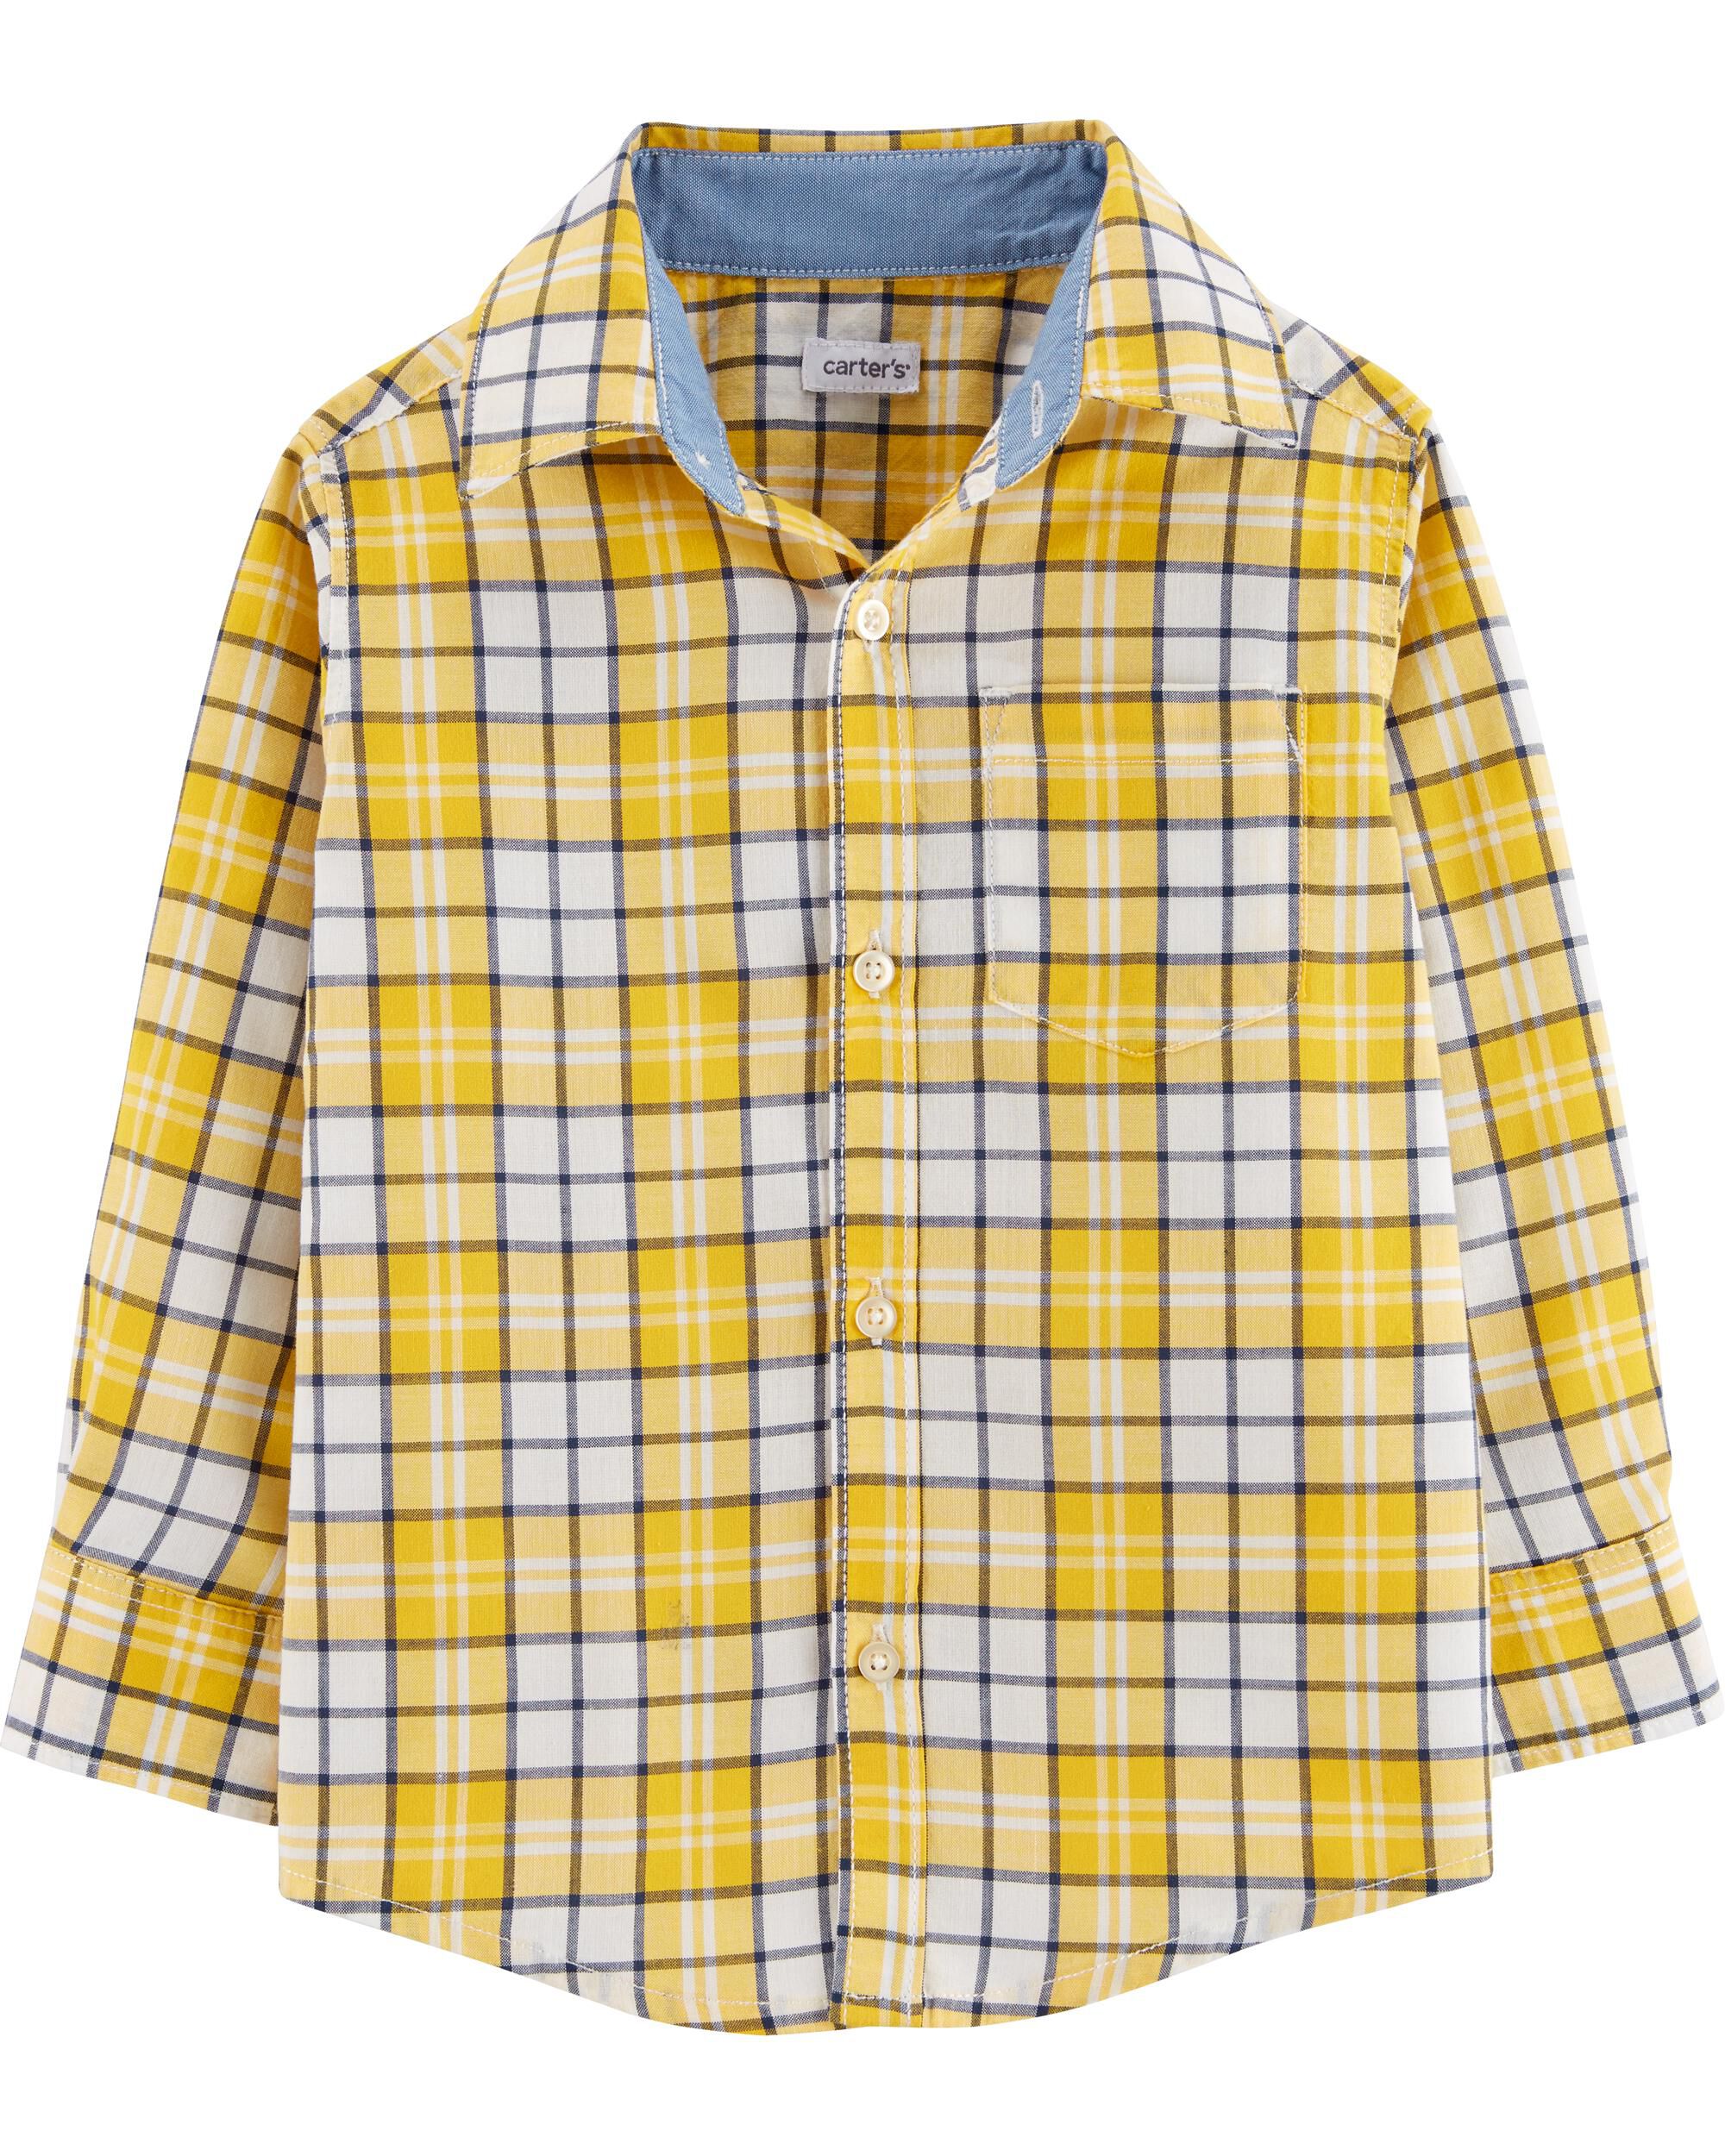 Carters Baby Boys Plaid Button-Front Shirt